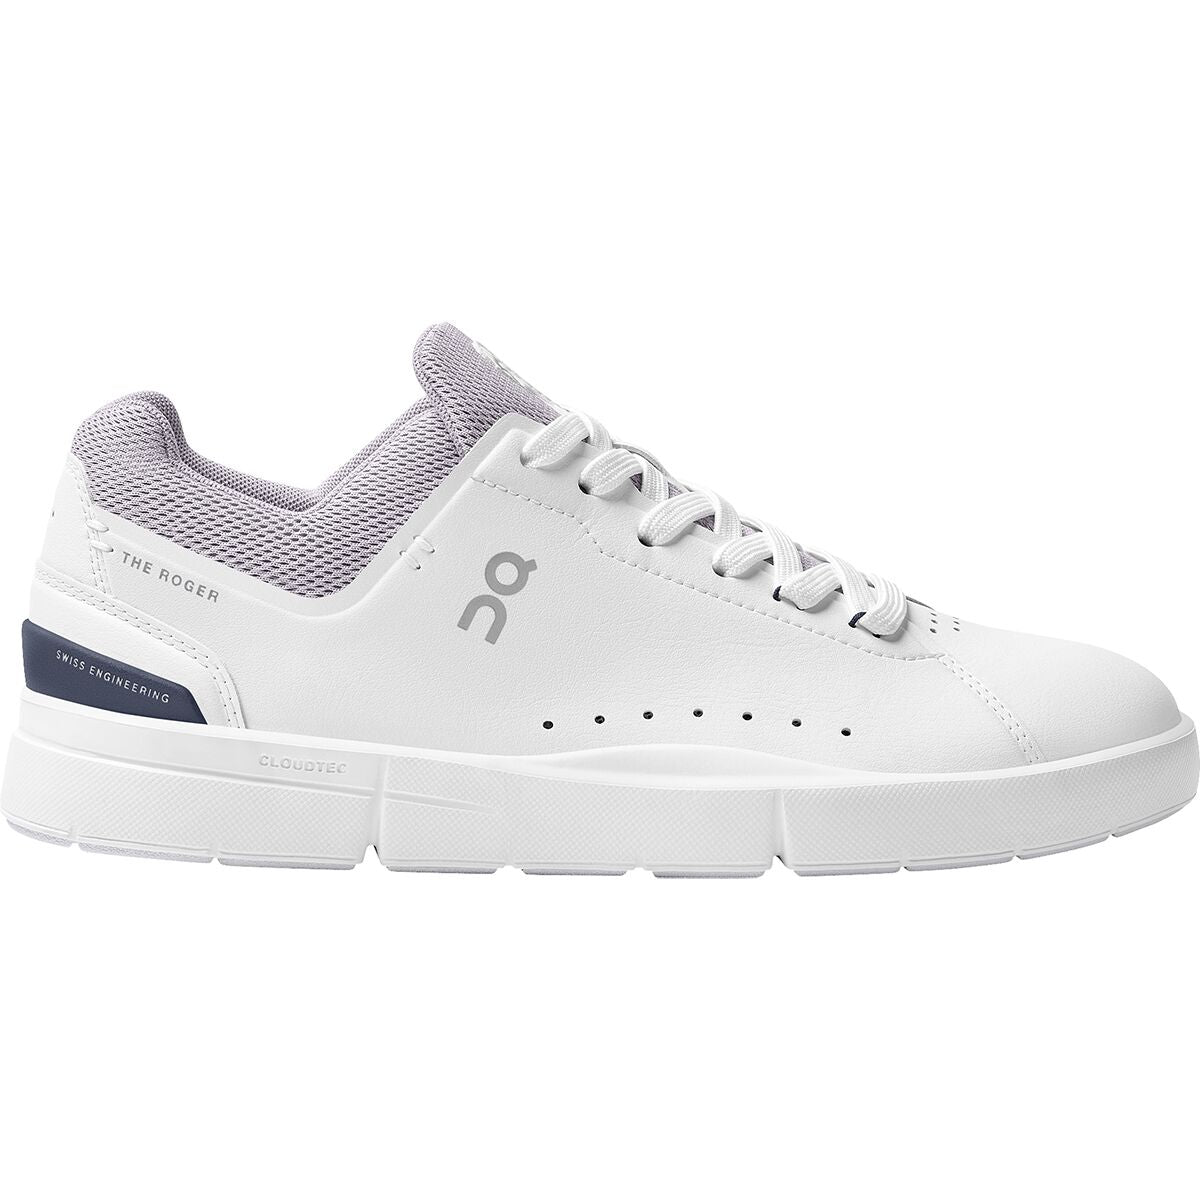 On Running Women's Cloud The Roger Advantage Shoes-FOOTWEAR-WHITE|LILAC-6-Kevin's Fine Outdoor Gear & Apparel